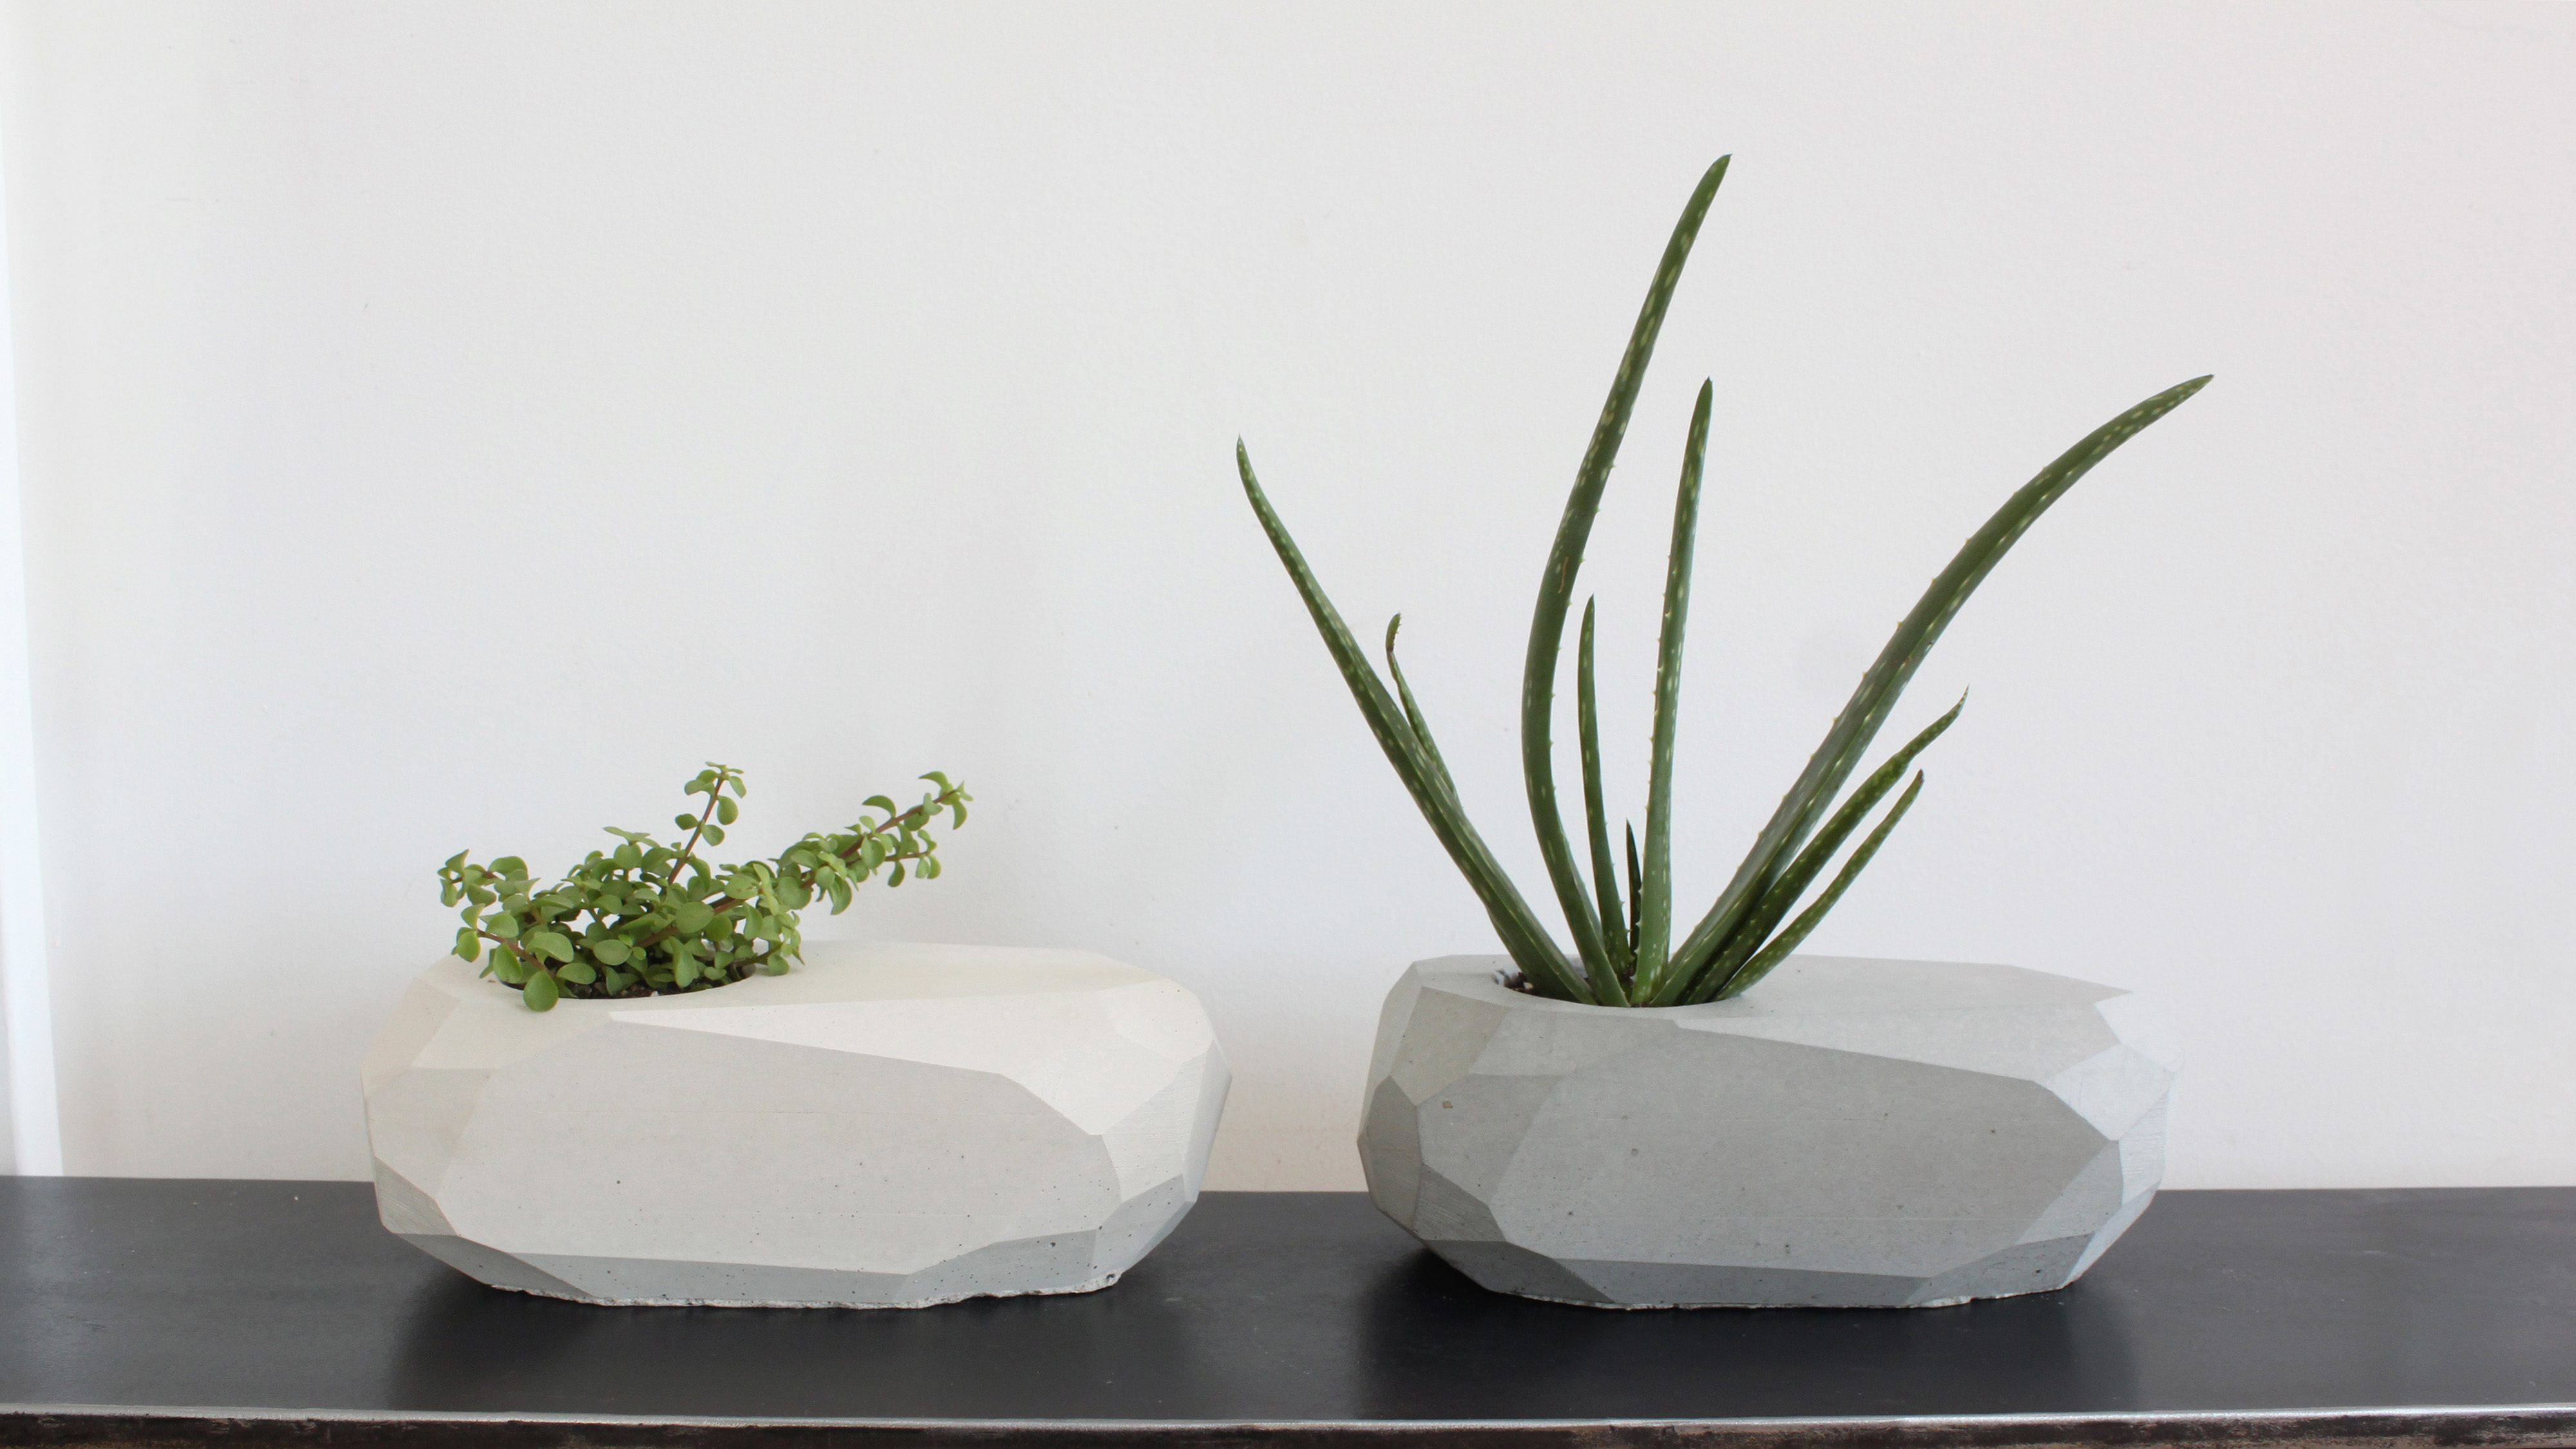 These geometric planters were cast out of concrete using reusable molds made out of silicone. For more information on this project and on DIY concrete countertops go to HomeMade-Modern.com